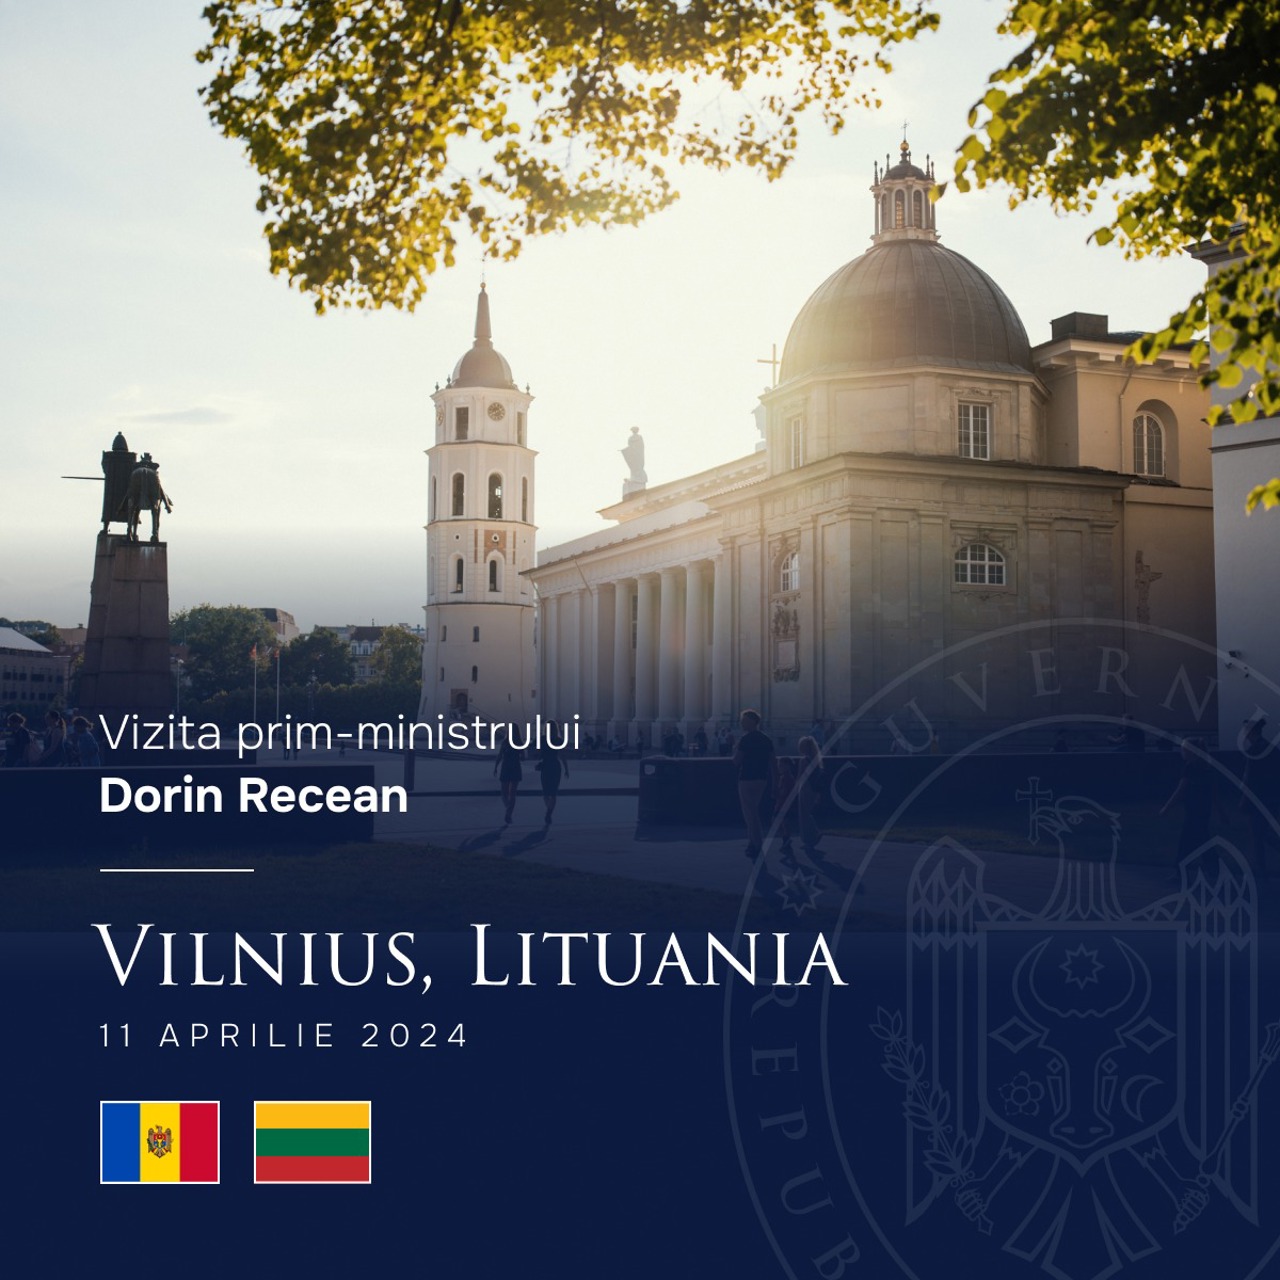 Prime Minister Dorin Recean is on a working visit to Lithuania